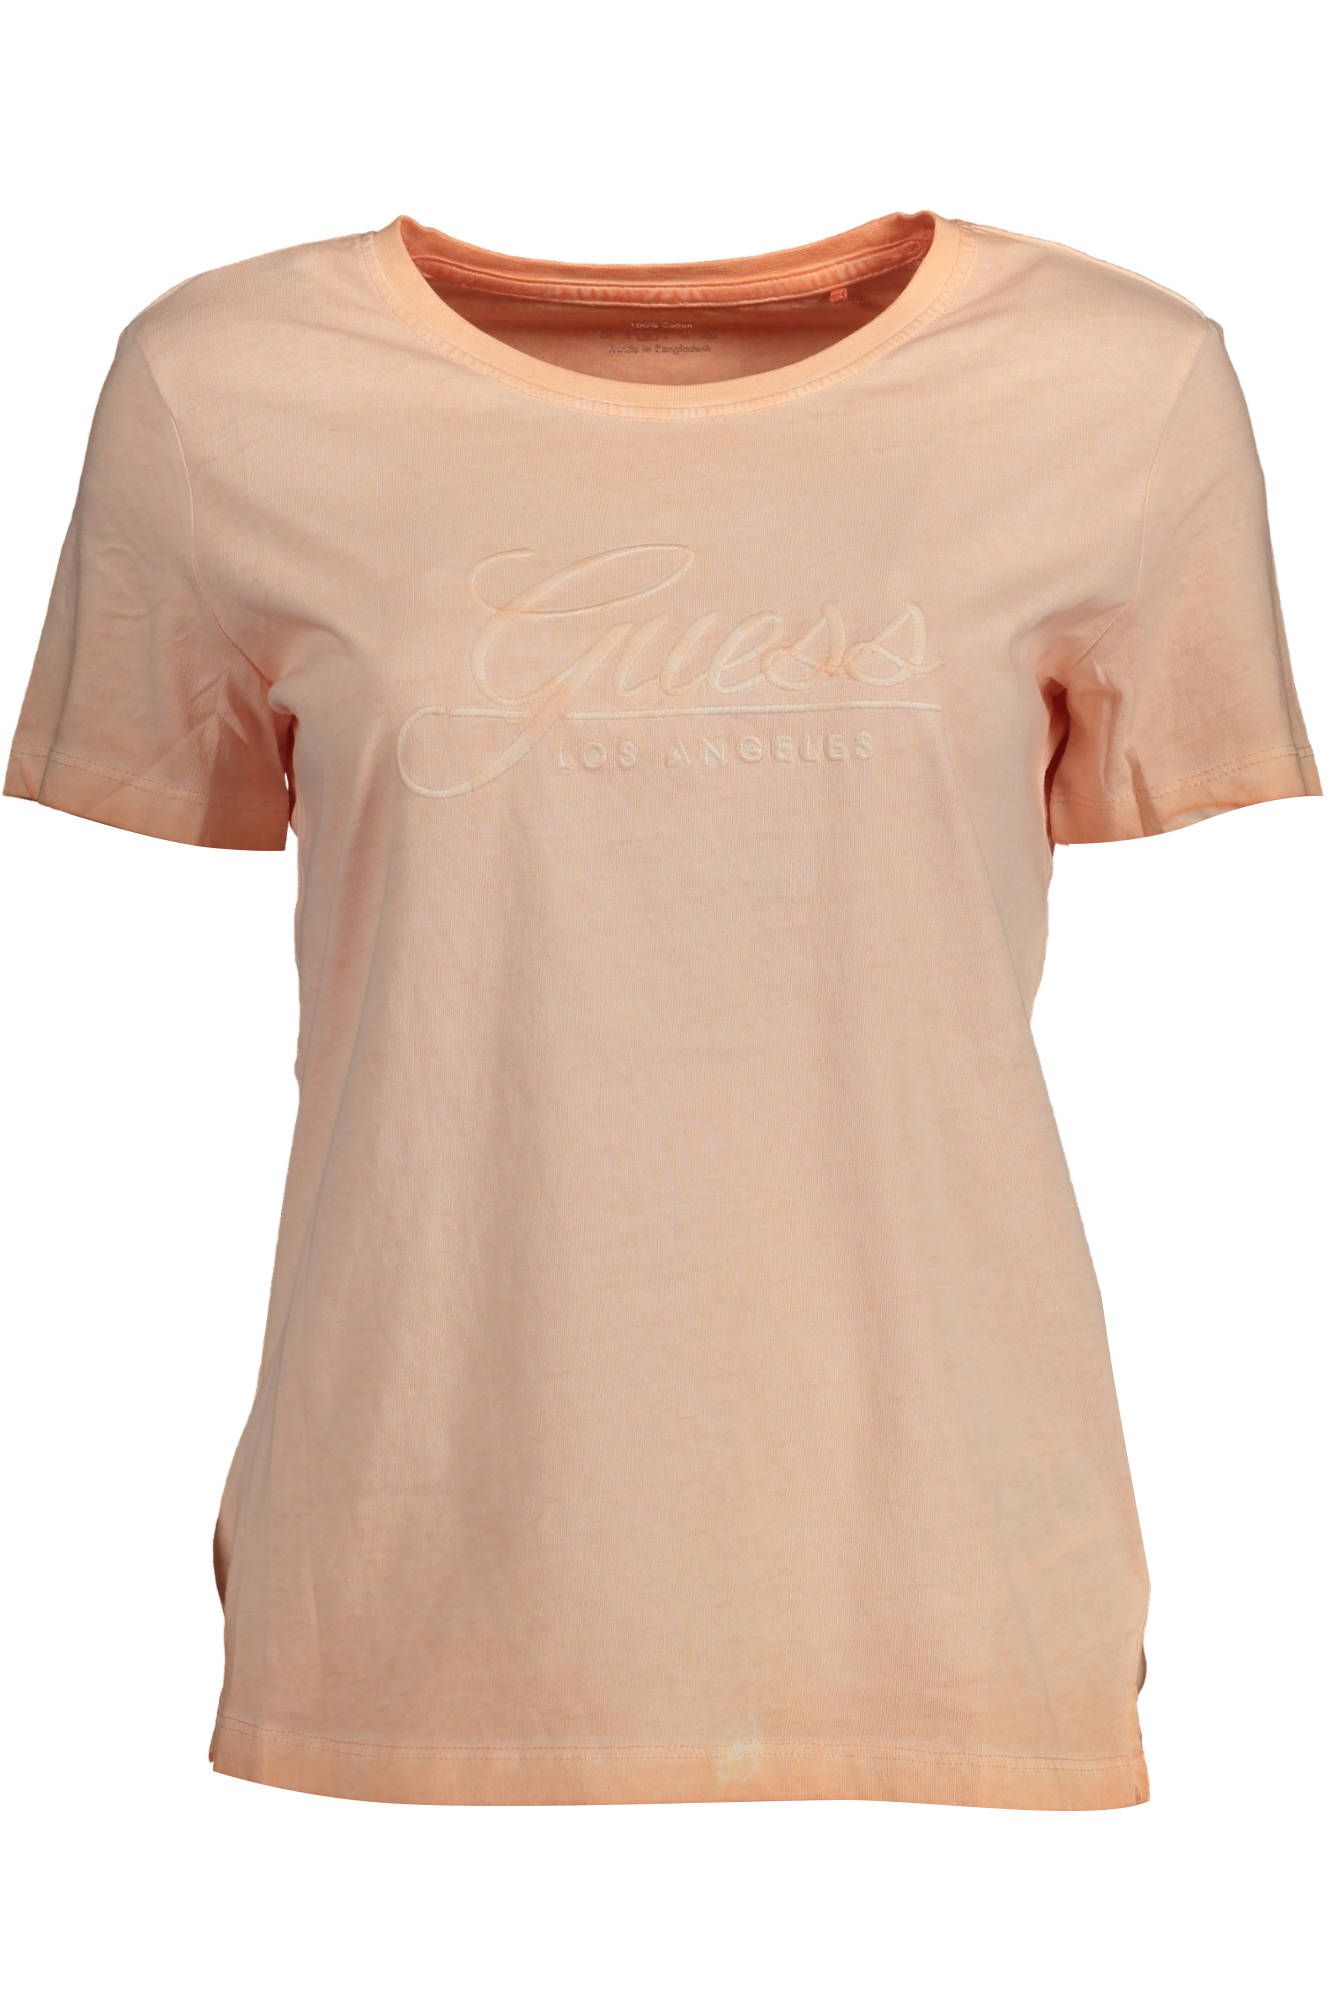 Chic Pink Embroidered Logo Tee